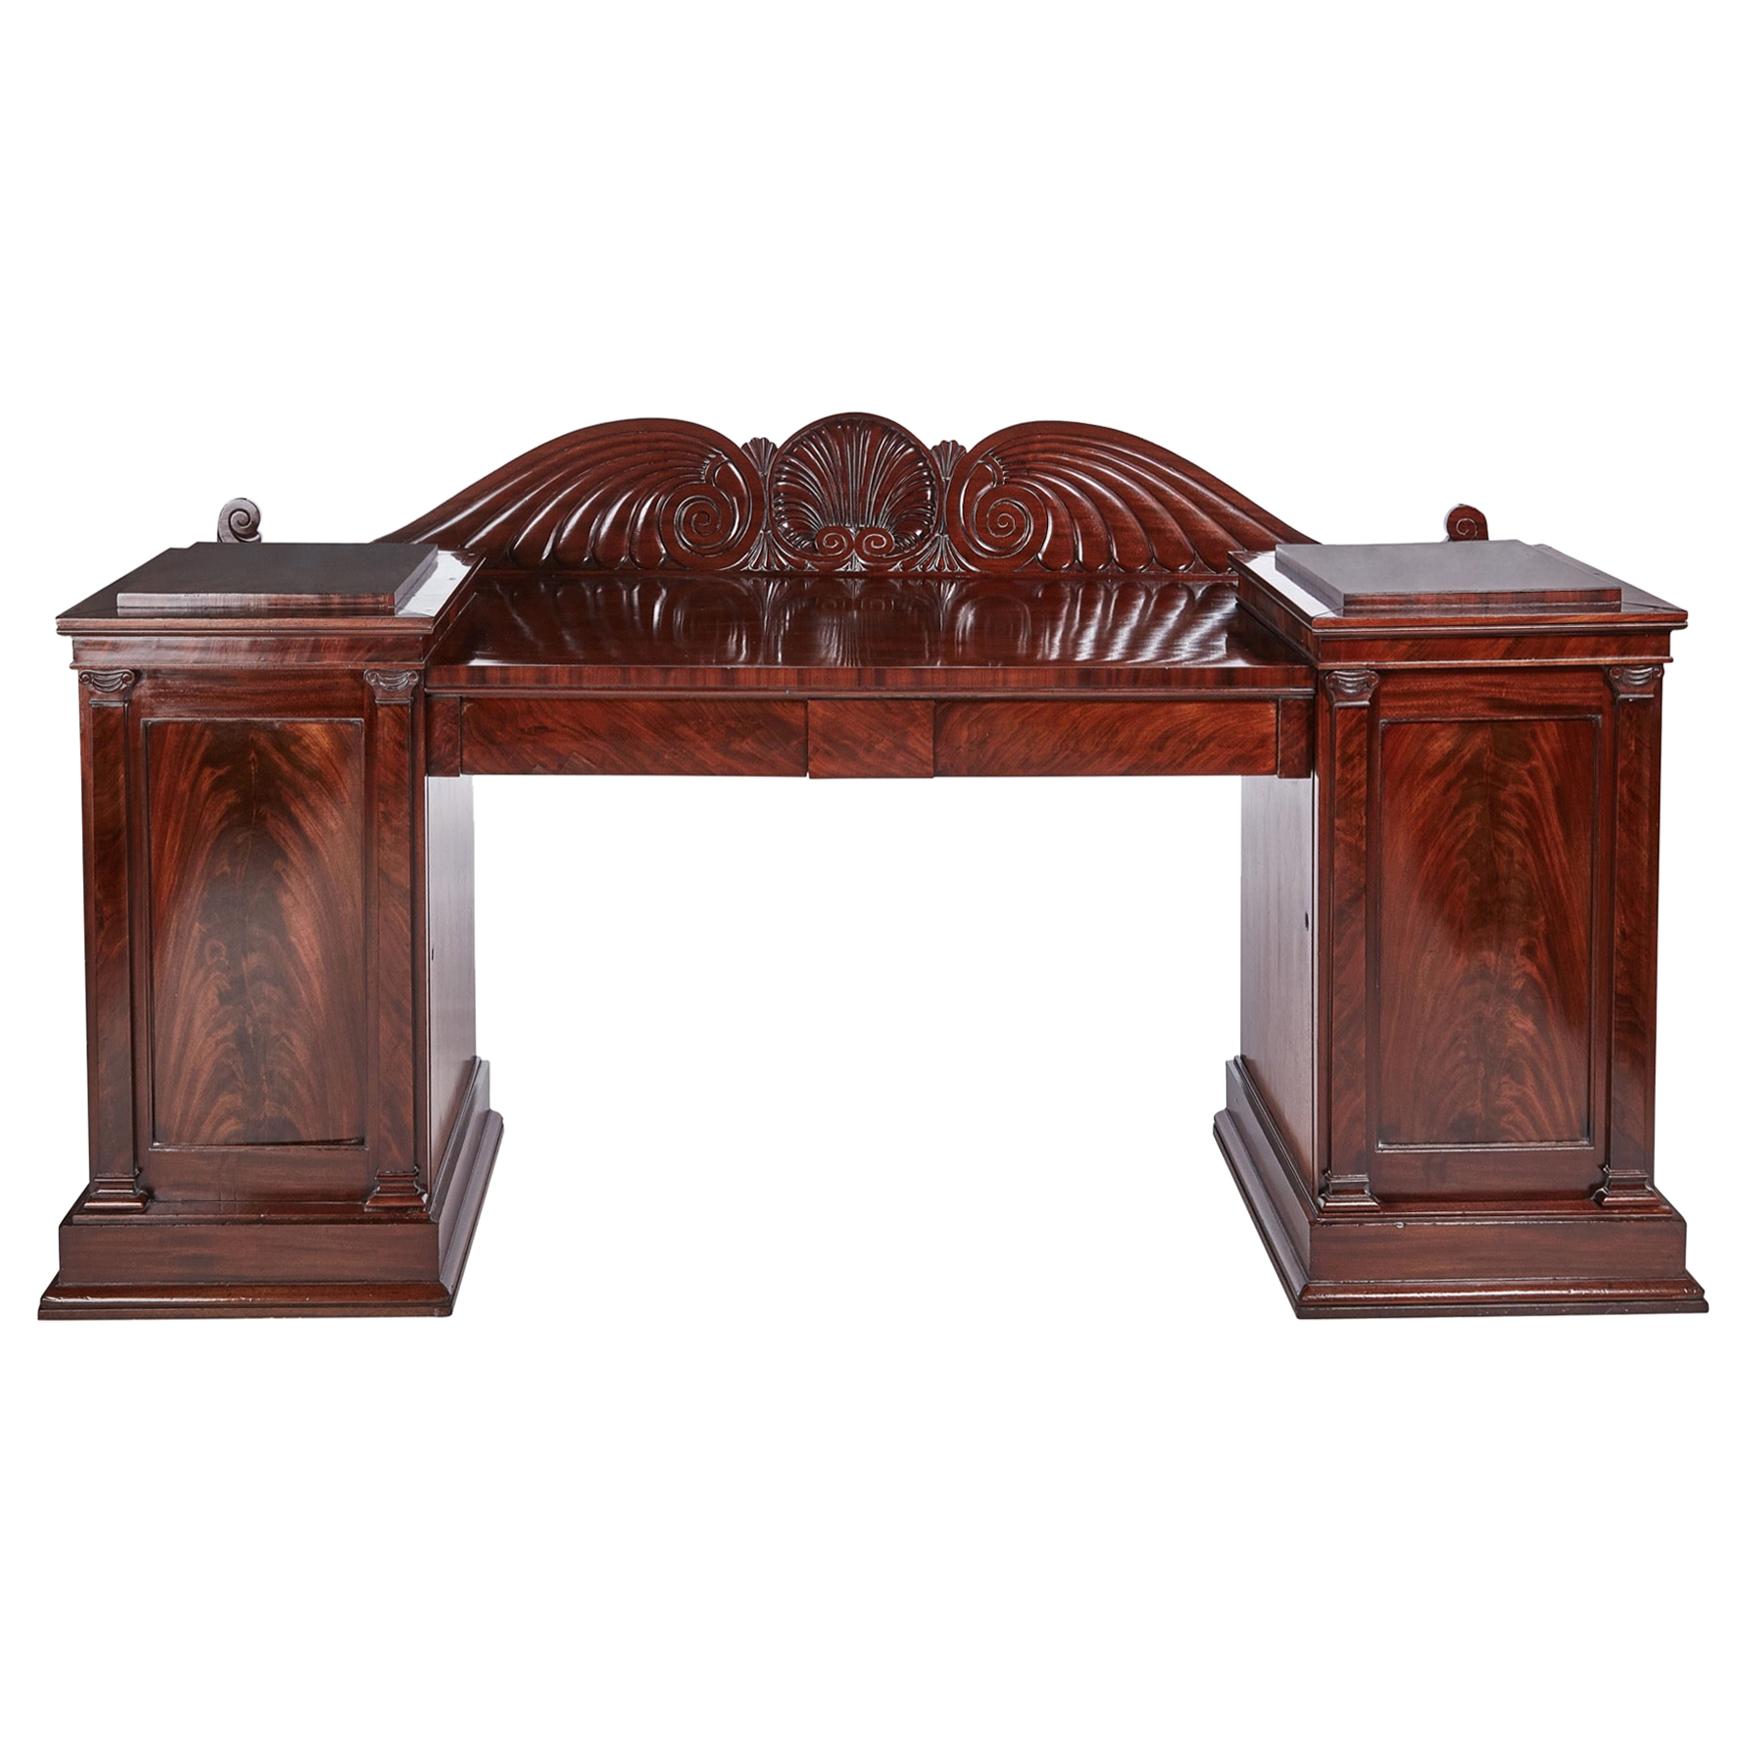 Exceptional Antique Mahogany Carved Sideboard